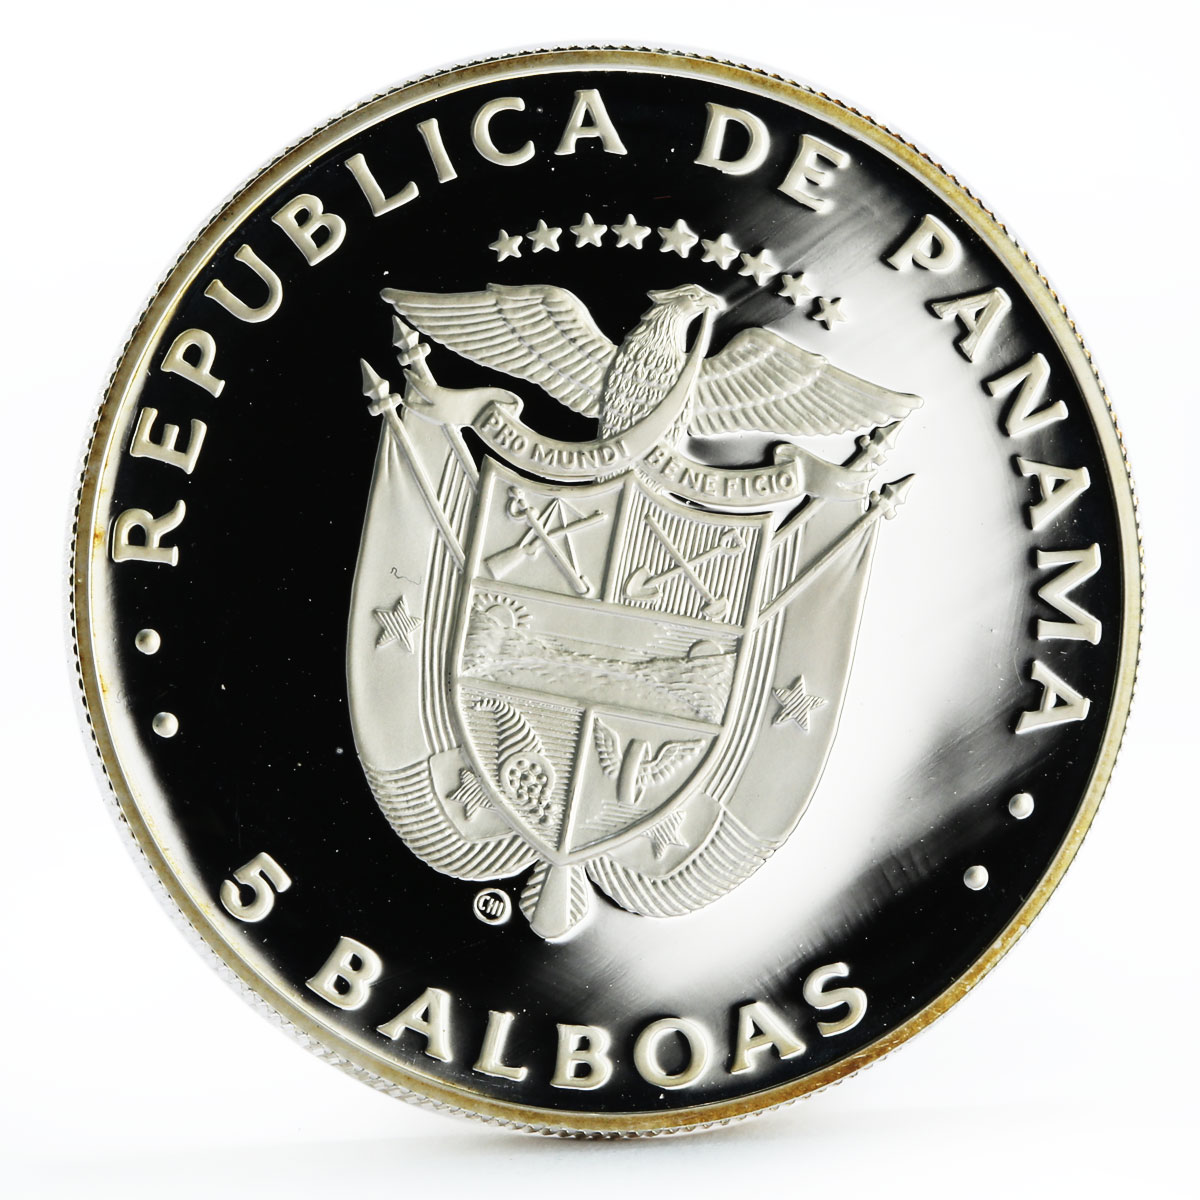 Panama 5 balboas Football World Cup in Spain Championship proof silver coin 1982